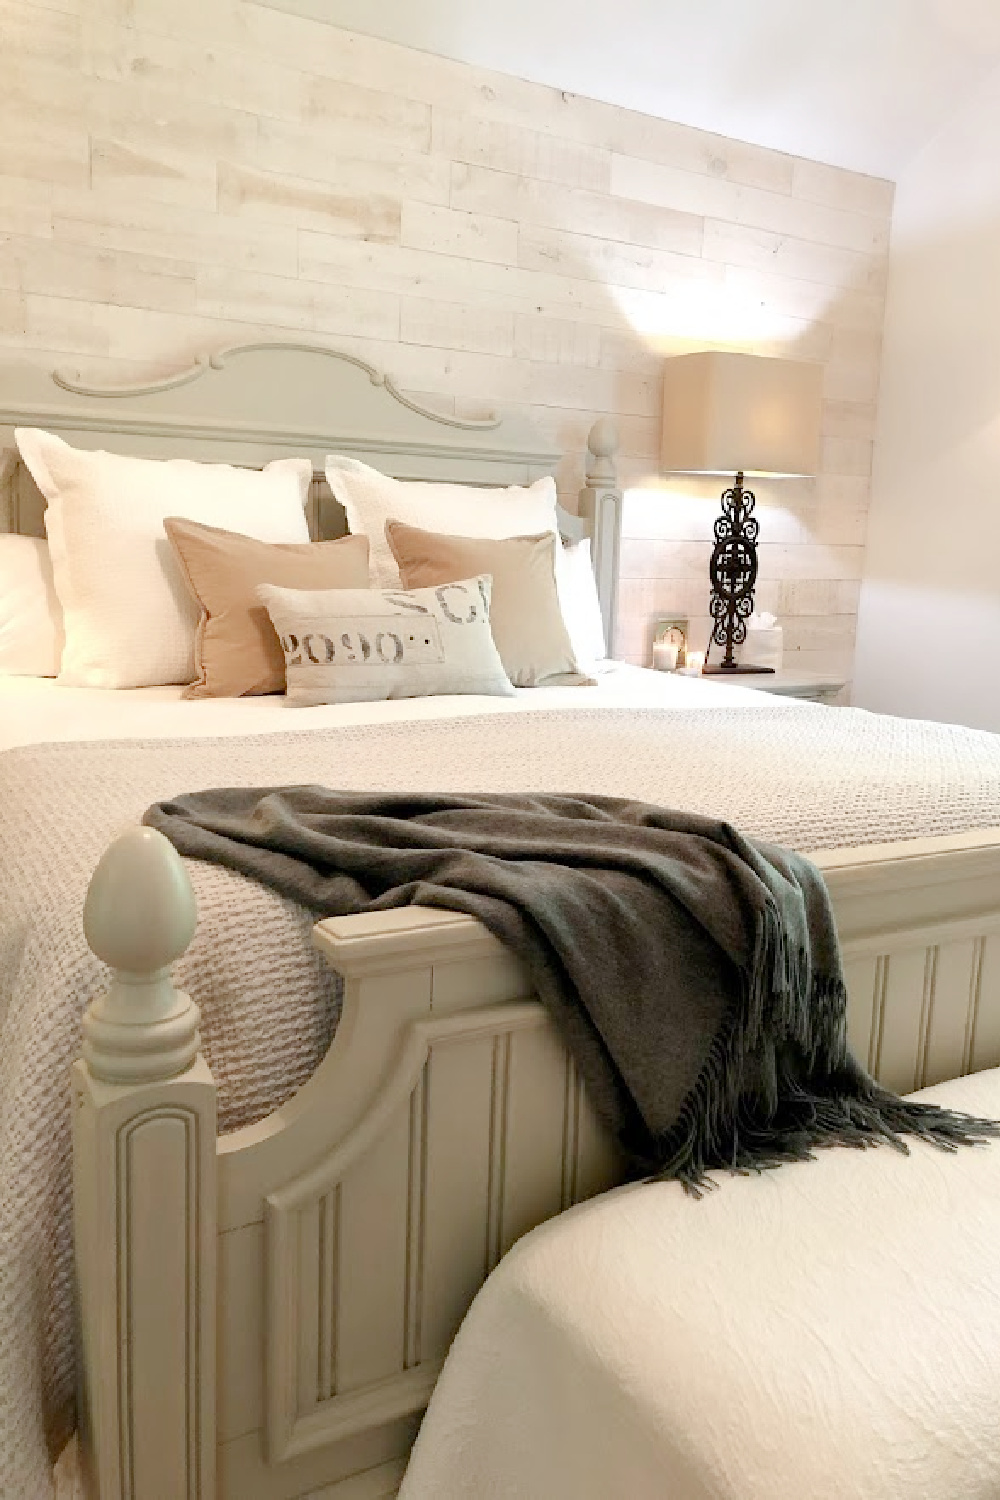 Charcoal cashmere throw in soothing and serene neutral bedroom with European country cottage style and Stikwood planked wall - Hello Lovely. Furniture is painted #reverepewter